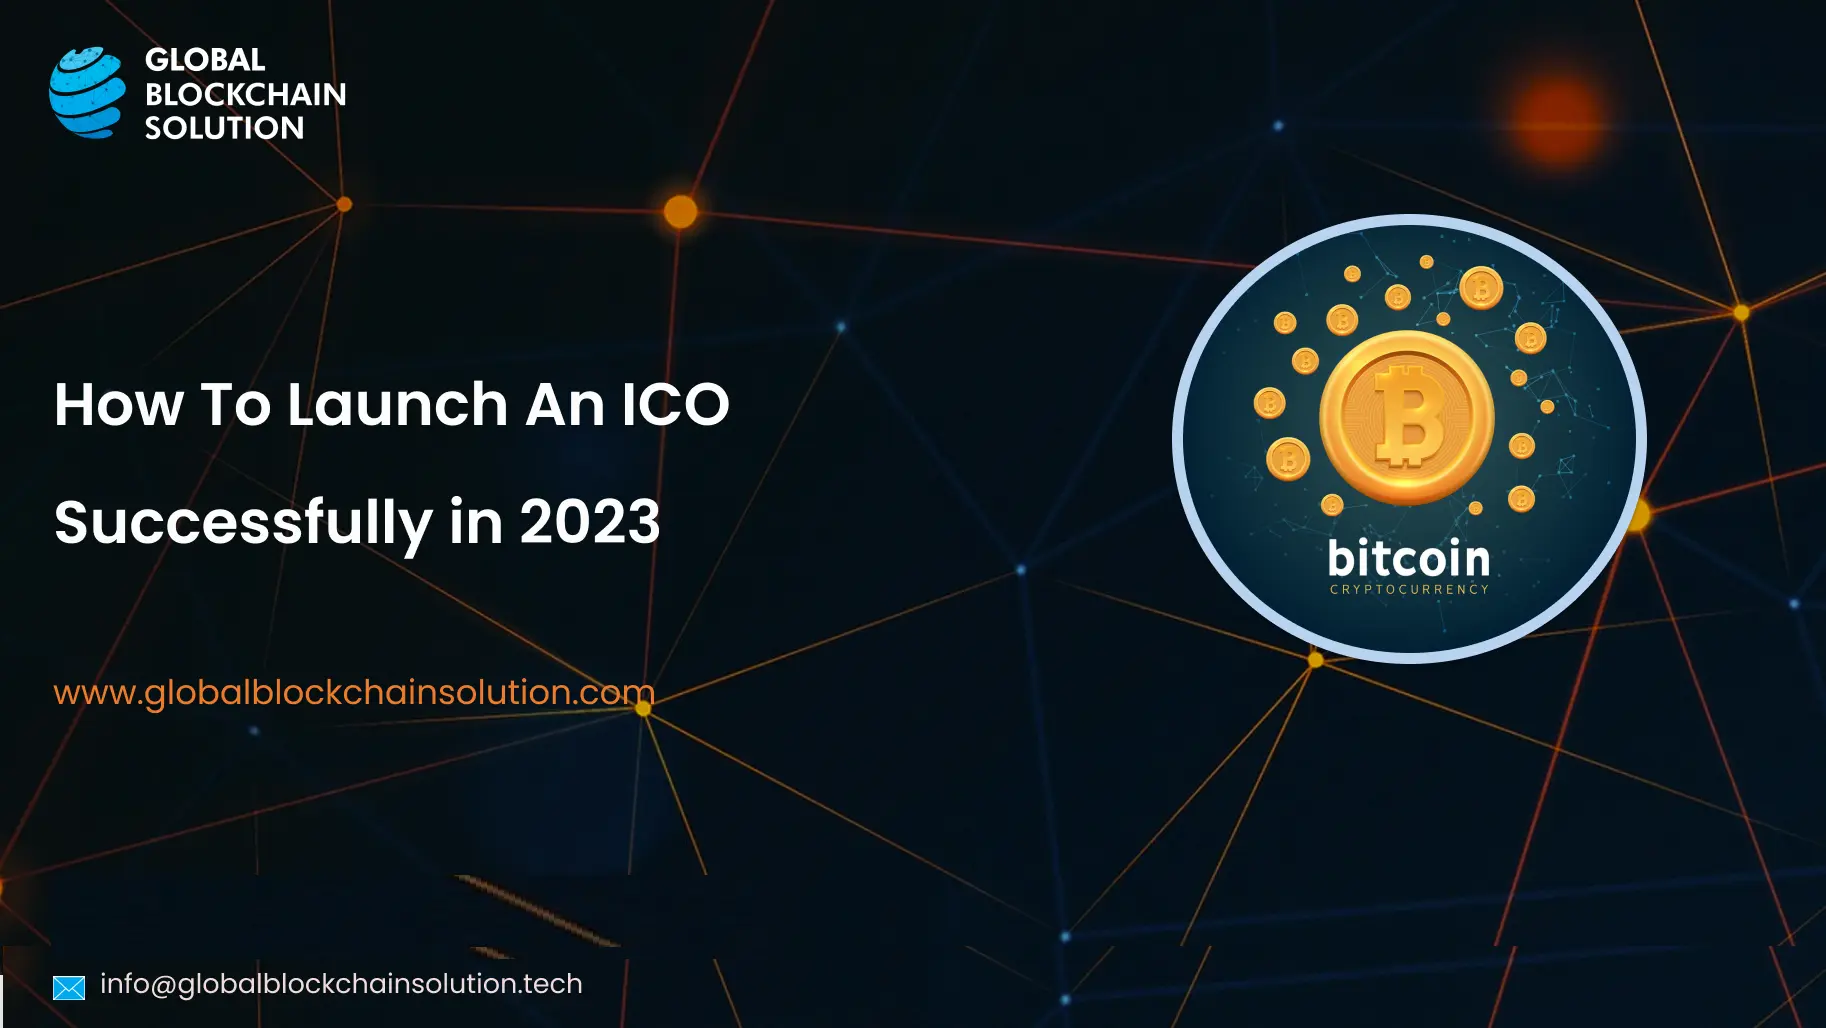 How to Launch an ICO Successfully in 2023